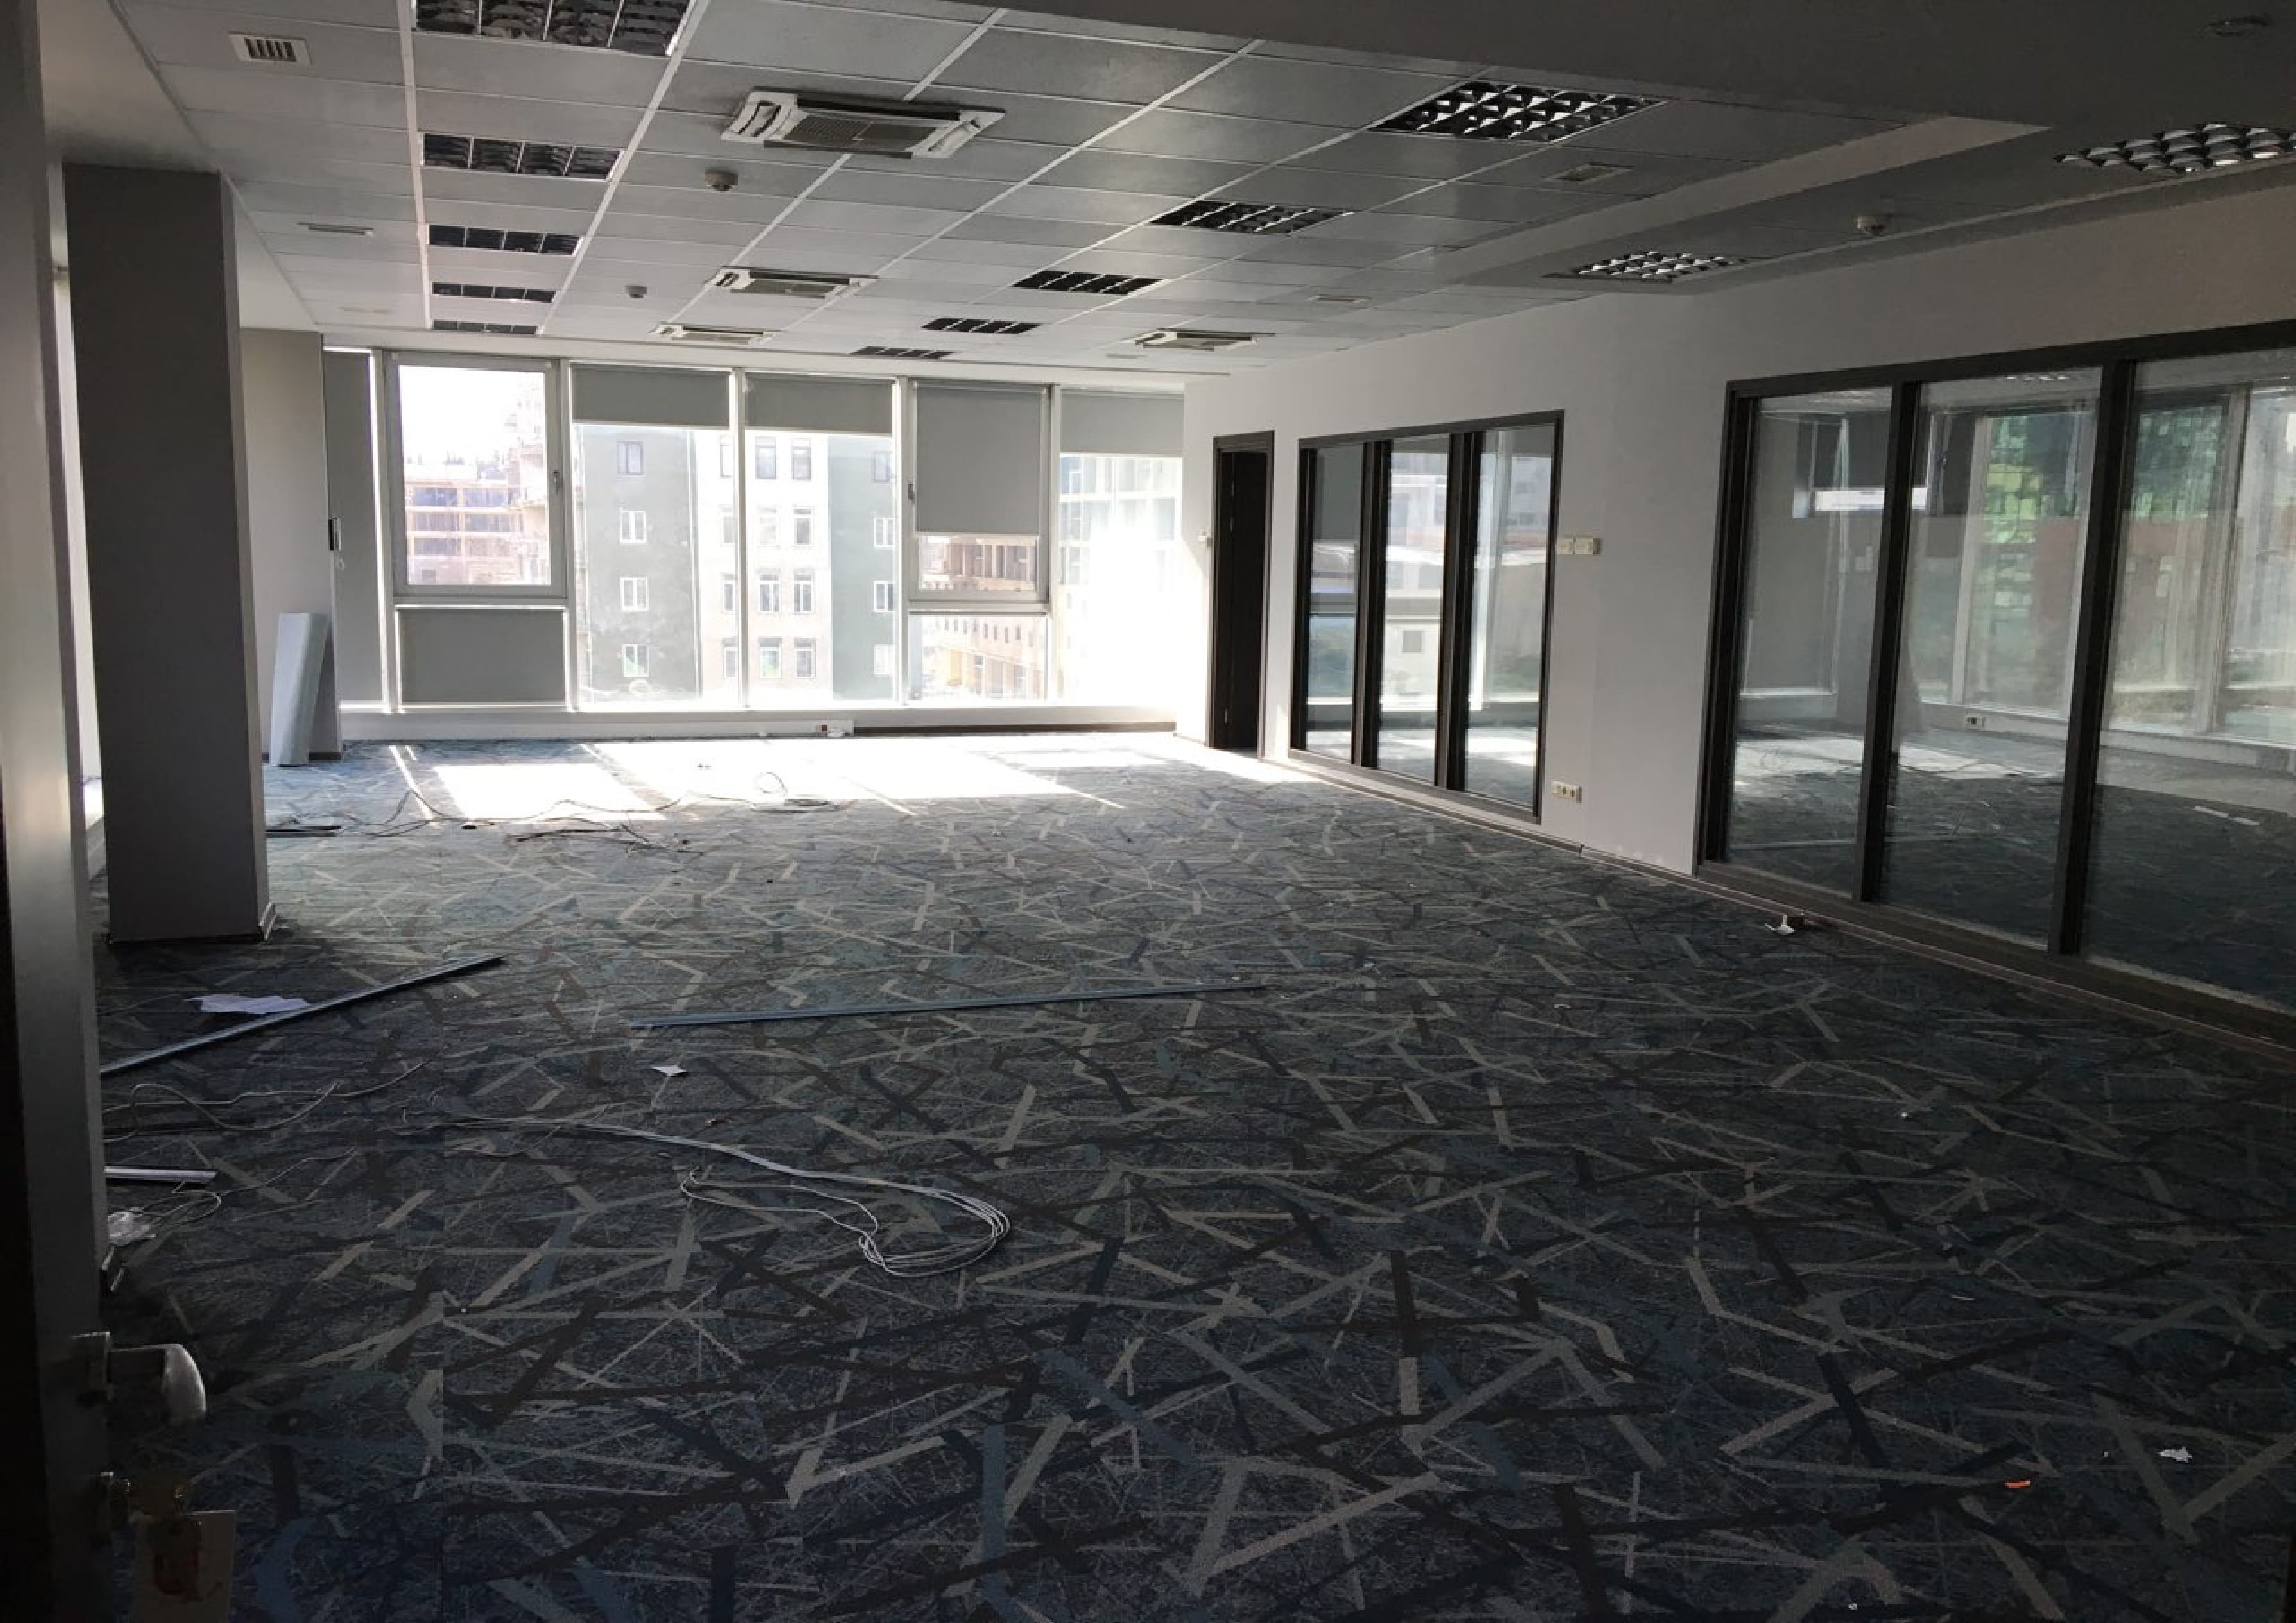 157.7 Sq.M A Class Office Space For Rent In Business Center At Vazha-Pshavela, Saburtalo, Tbilisi